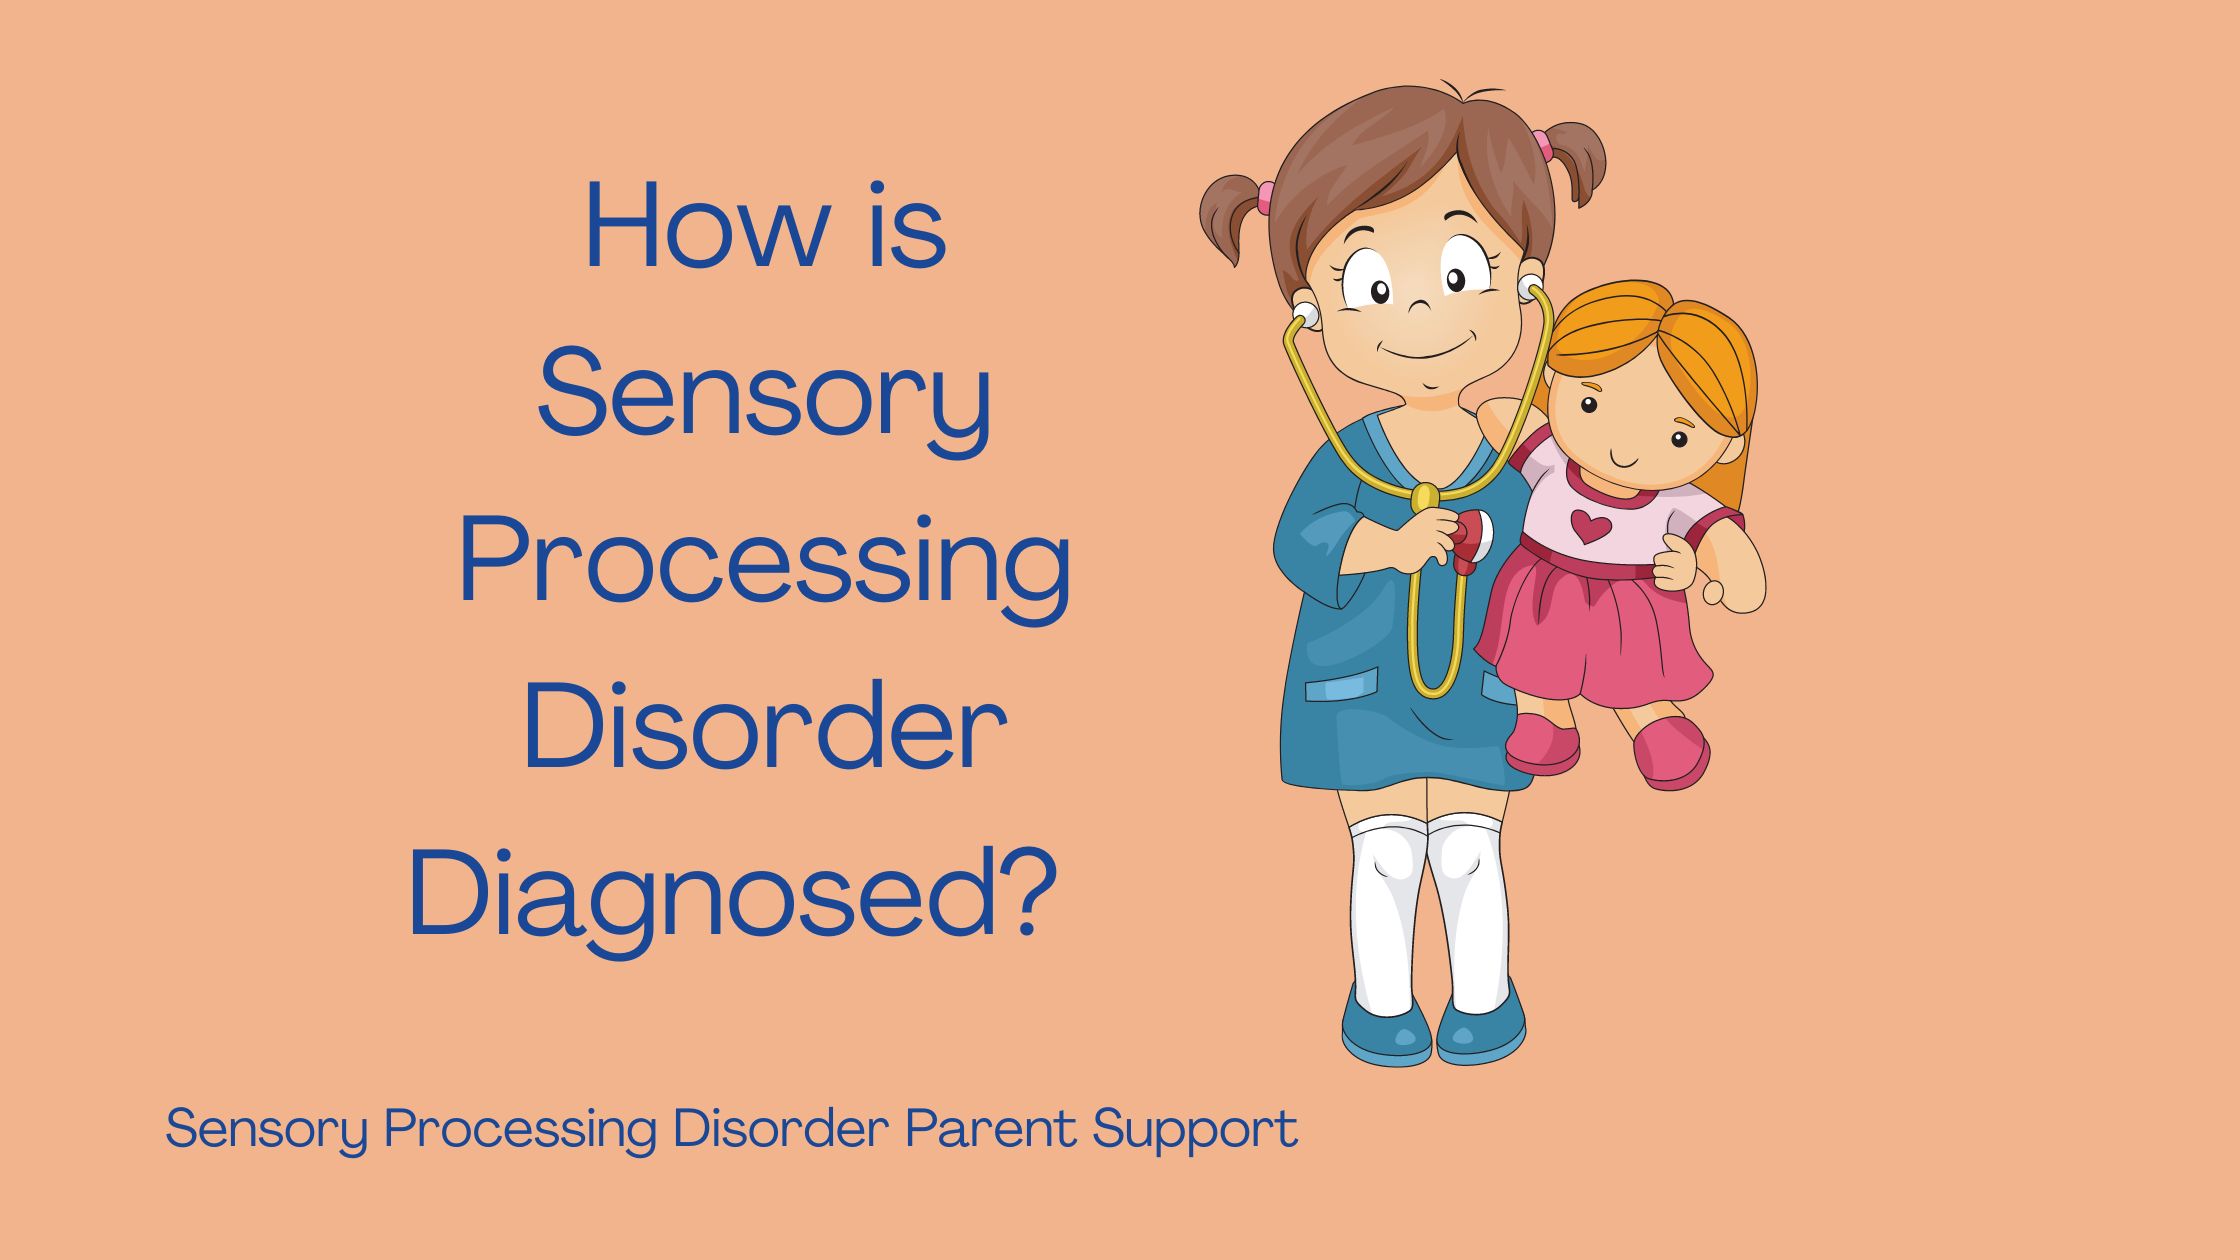 child with sensory processing disorder holding a stethoscope and teddy bear  How is Sensory Processing Disorder Diagnosed?